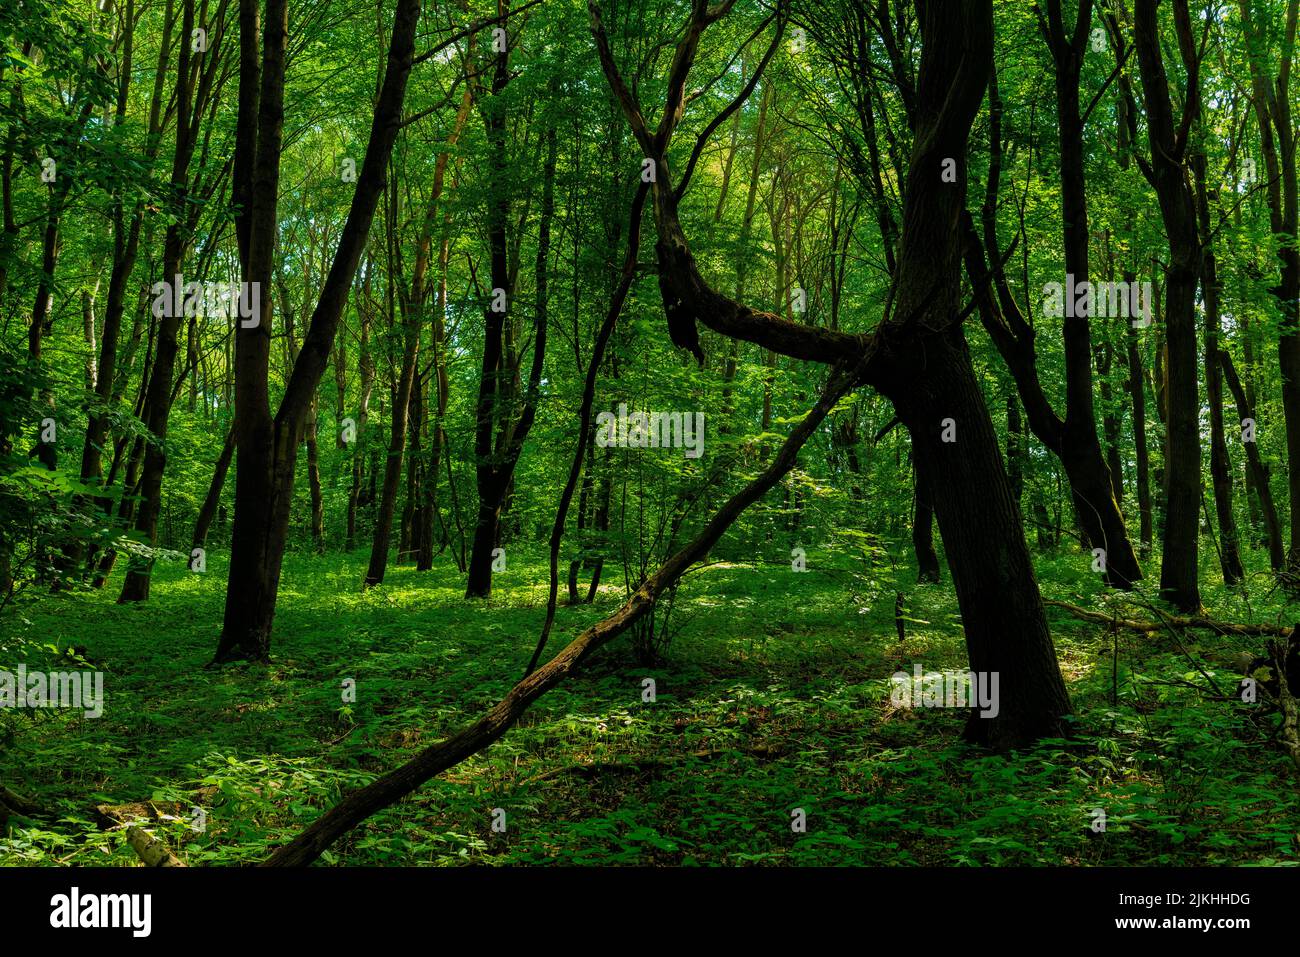 Deciduous forest with oak trees in summer, forest floor overgrown with wild plants Stock Photo